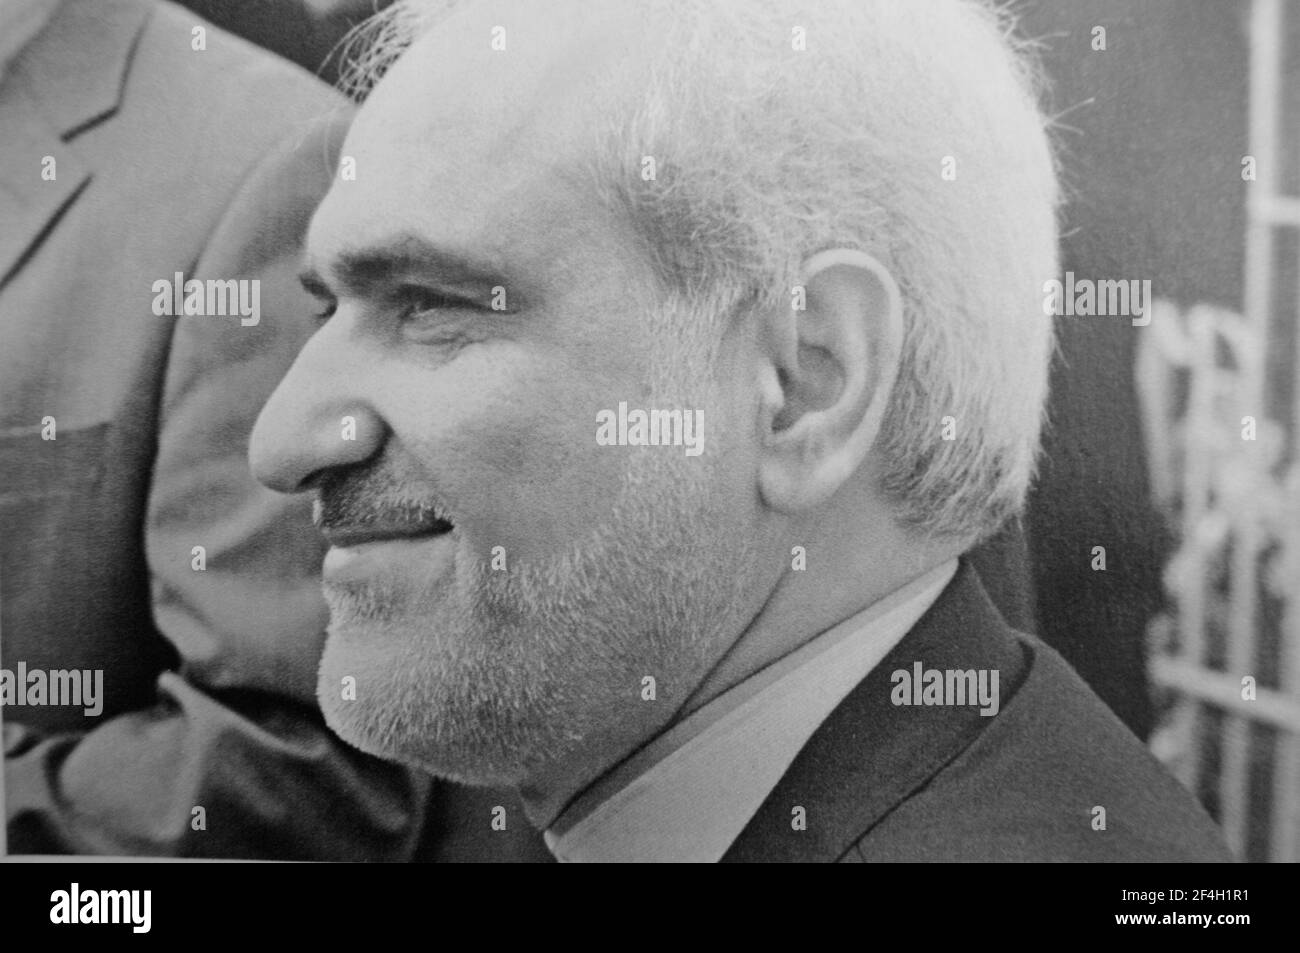 Switzerland: Iranian Foreign Minister Mohammed Dschawad Sarif ( محمد جواد ظریف پیرانشهری ) at the 35th year of the revolution celebration in Bern Stock Photo